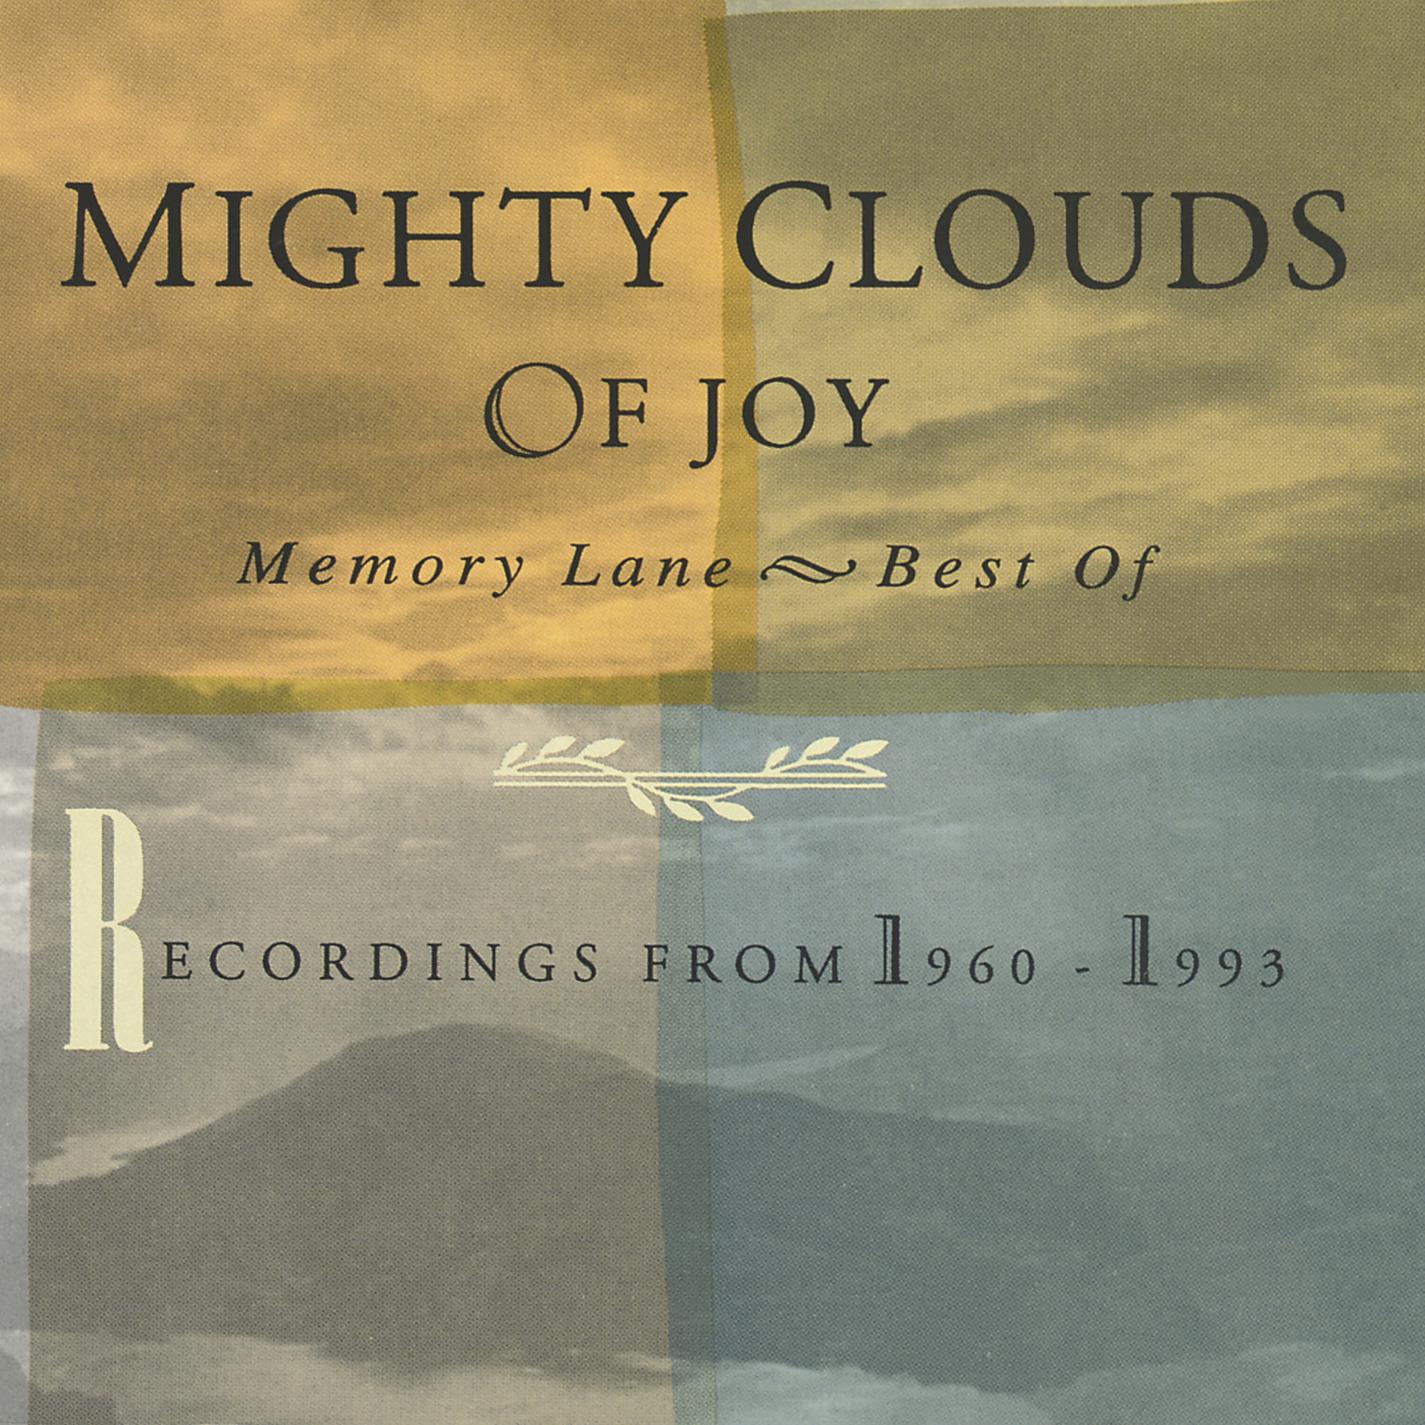 The Mighty Clouds of Joy - He's My Rooftop